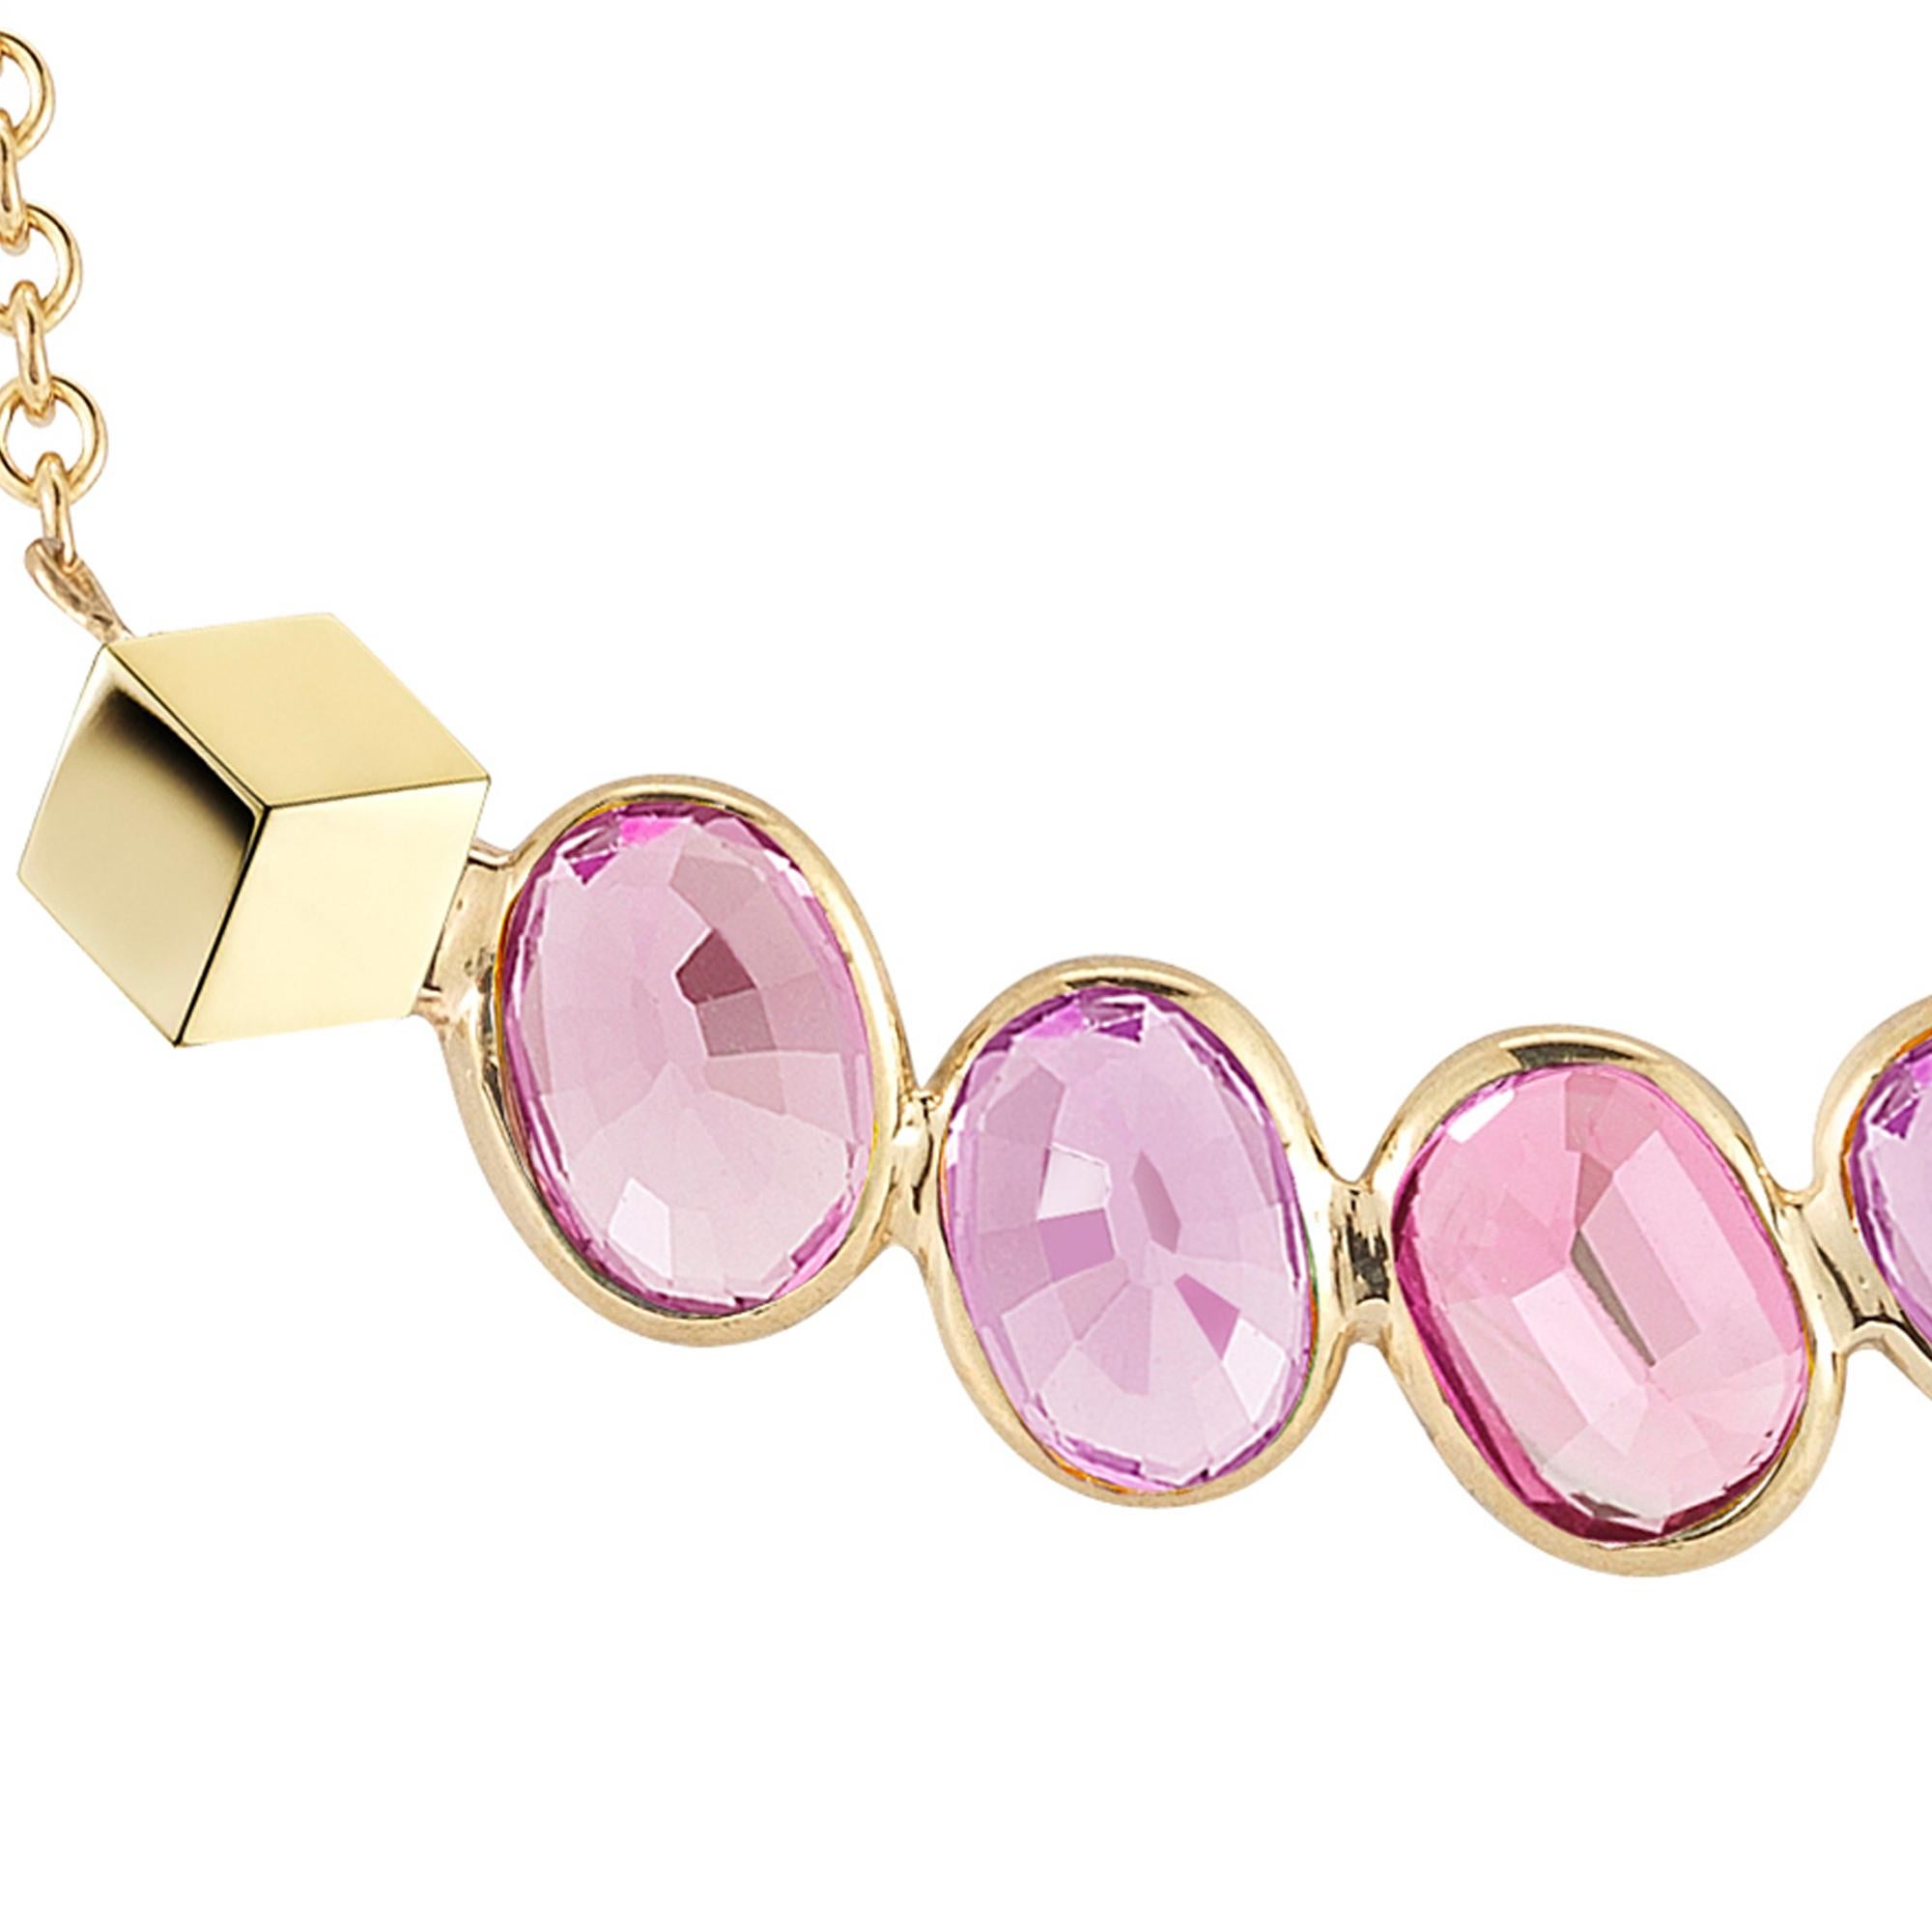 Paolo Costagli 18kt Yellow Gold Pink Sapphire, 2.91 Carat Ombré Pendant Necklace (Ovalschliff) im Angebot